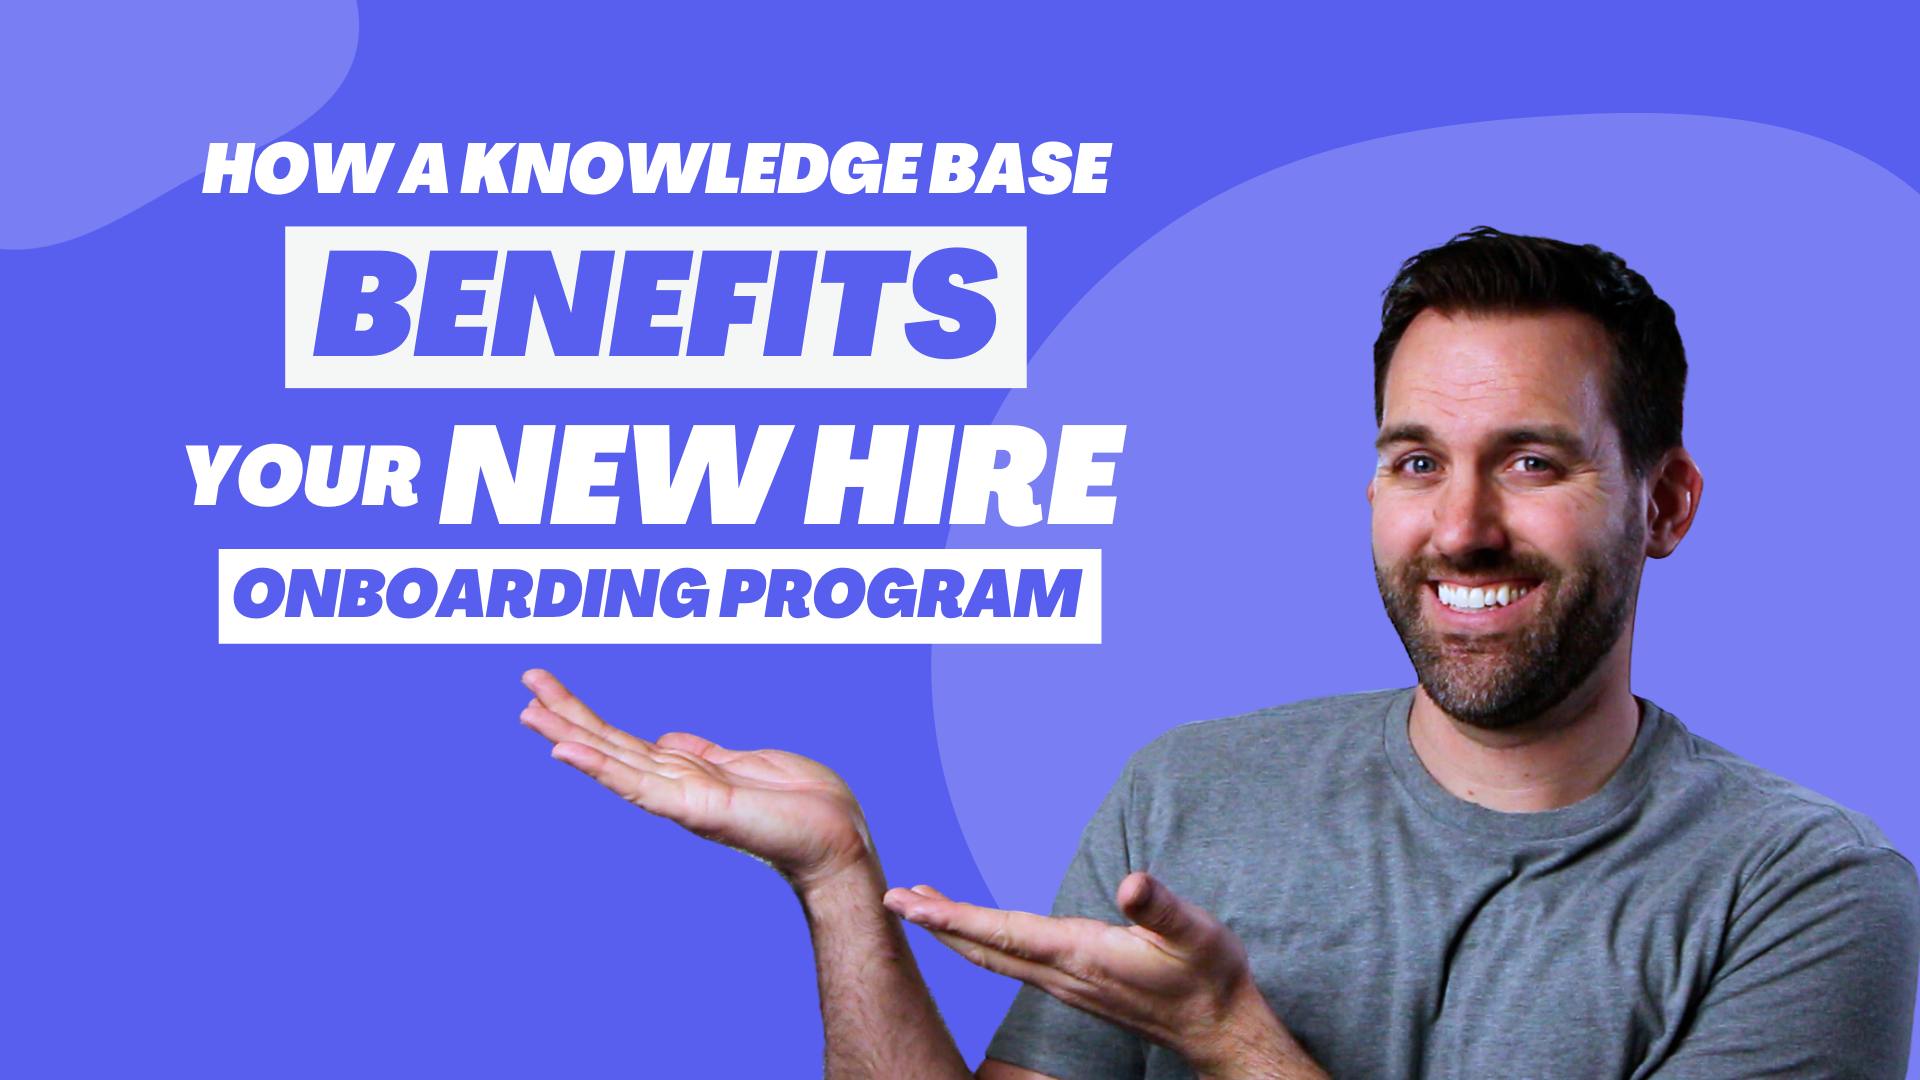 4 Benefits to Using a Knowledge Base for New Hire Onboarding